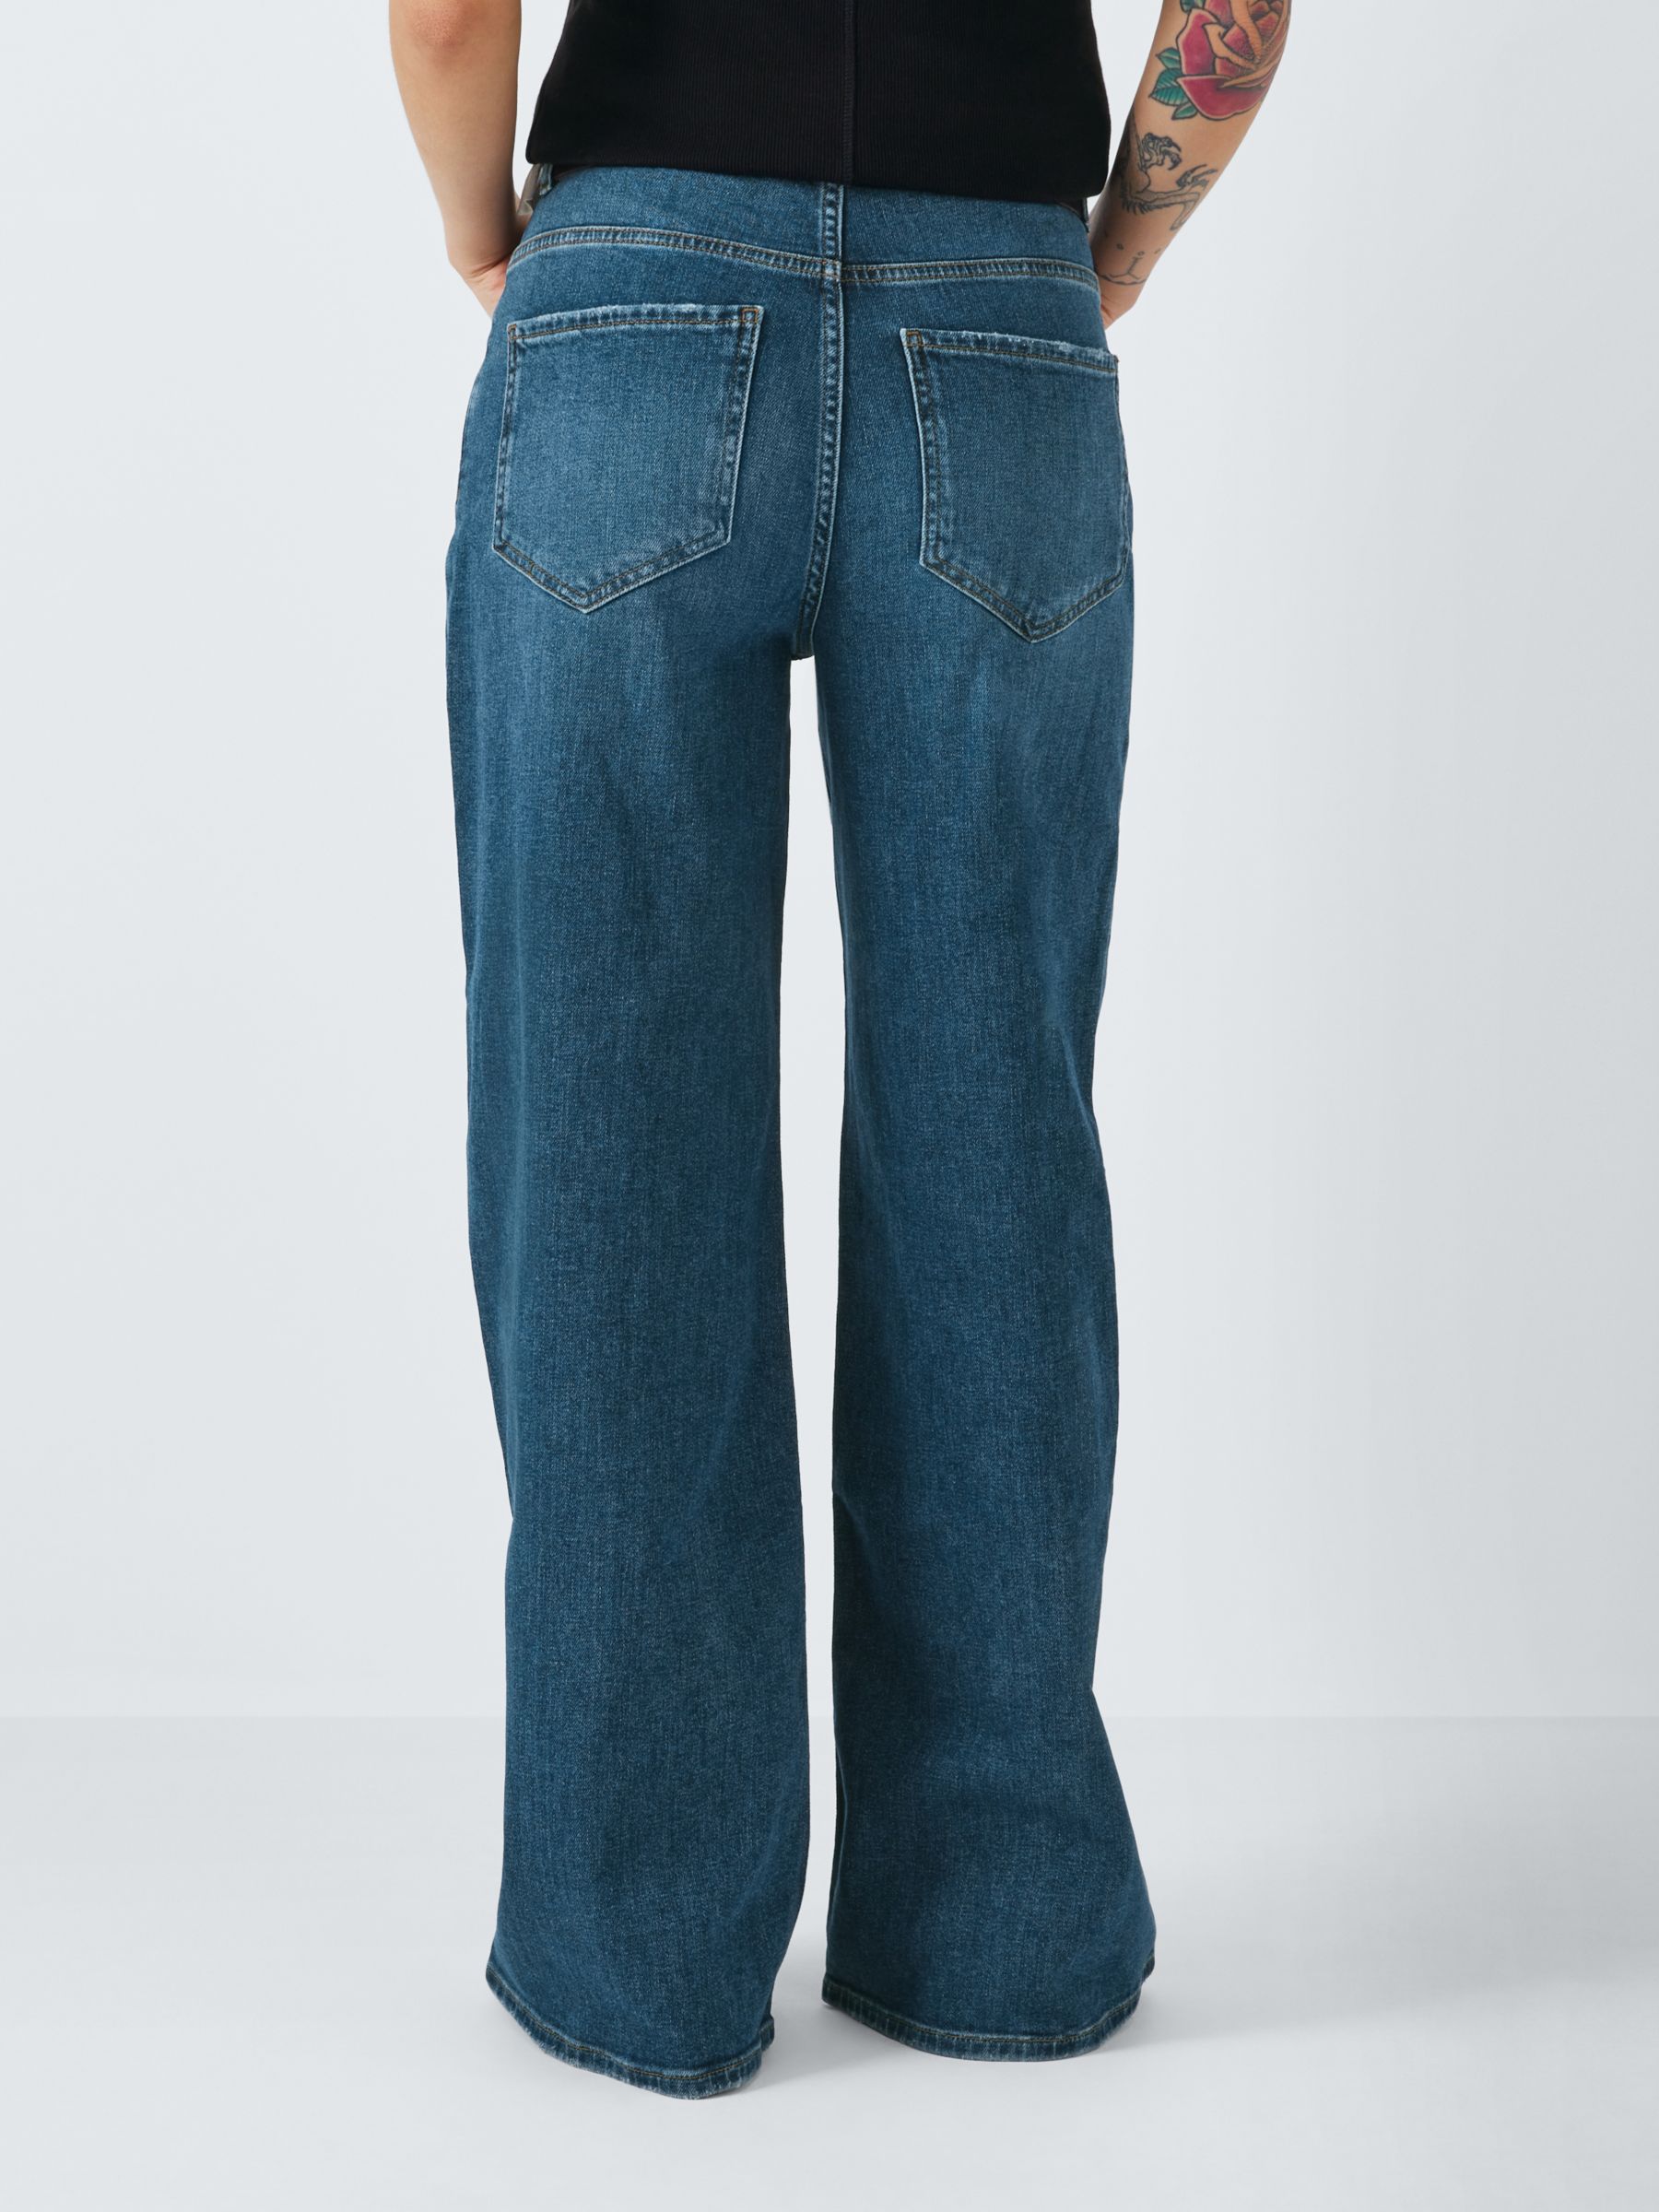 AND/OR Westlake High Rise Wide Leg Jeans, Blue Horizon, 26R